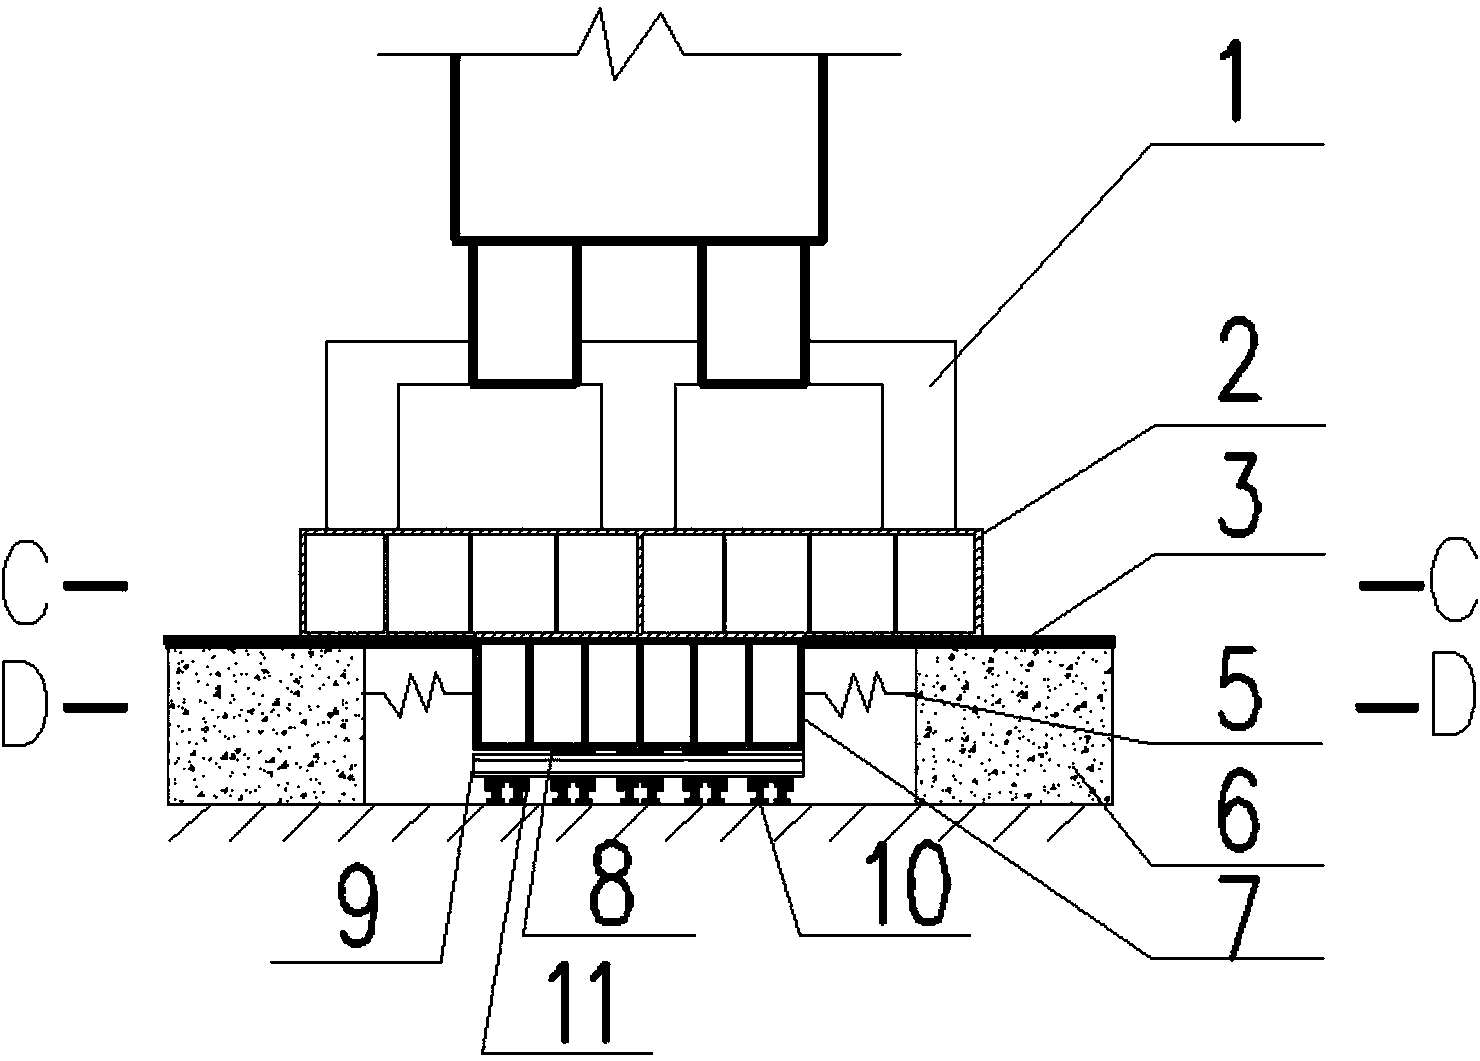 Shock insulating device resistant to pulling and twisting